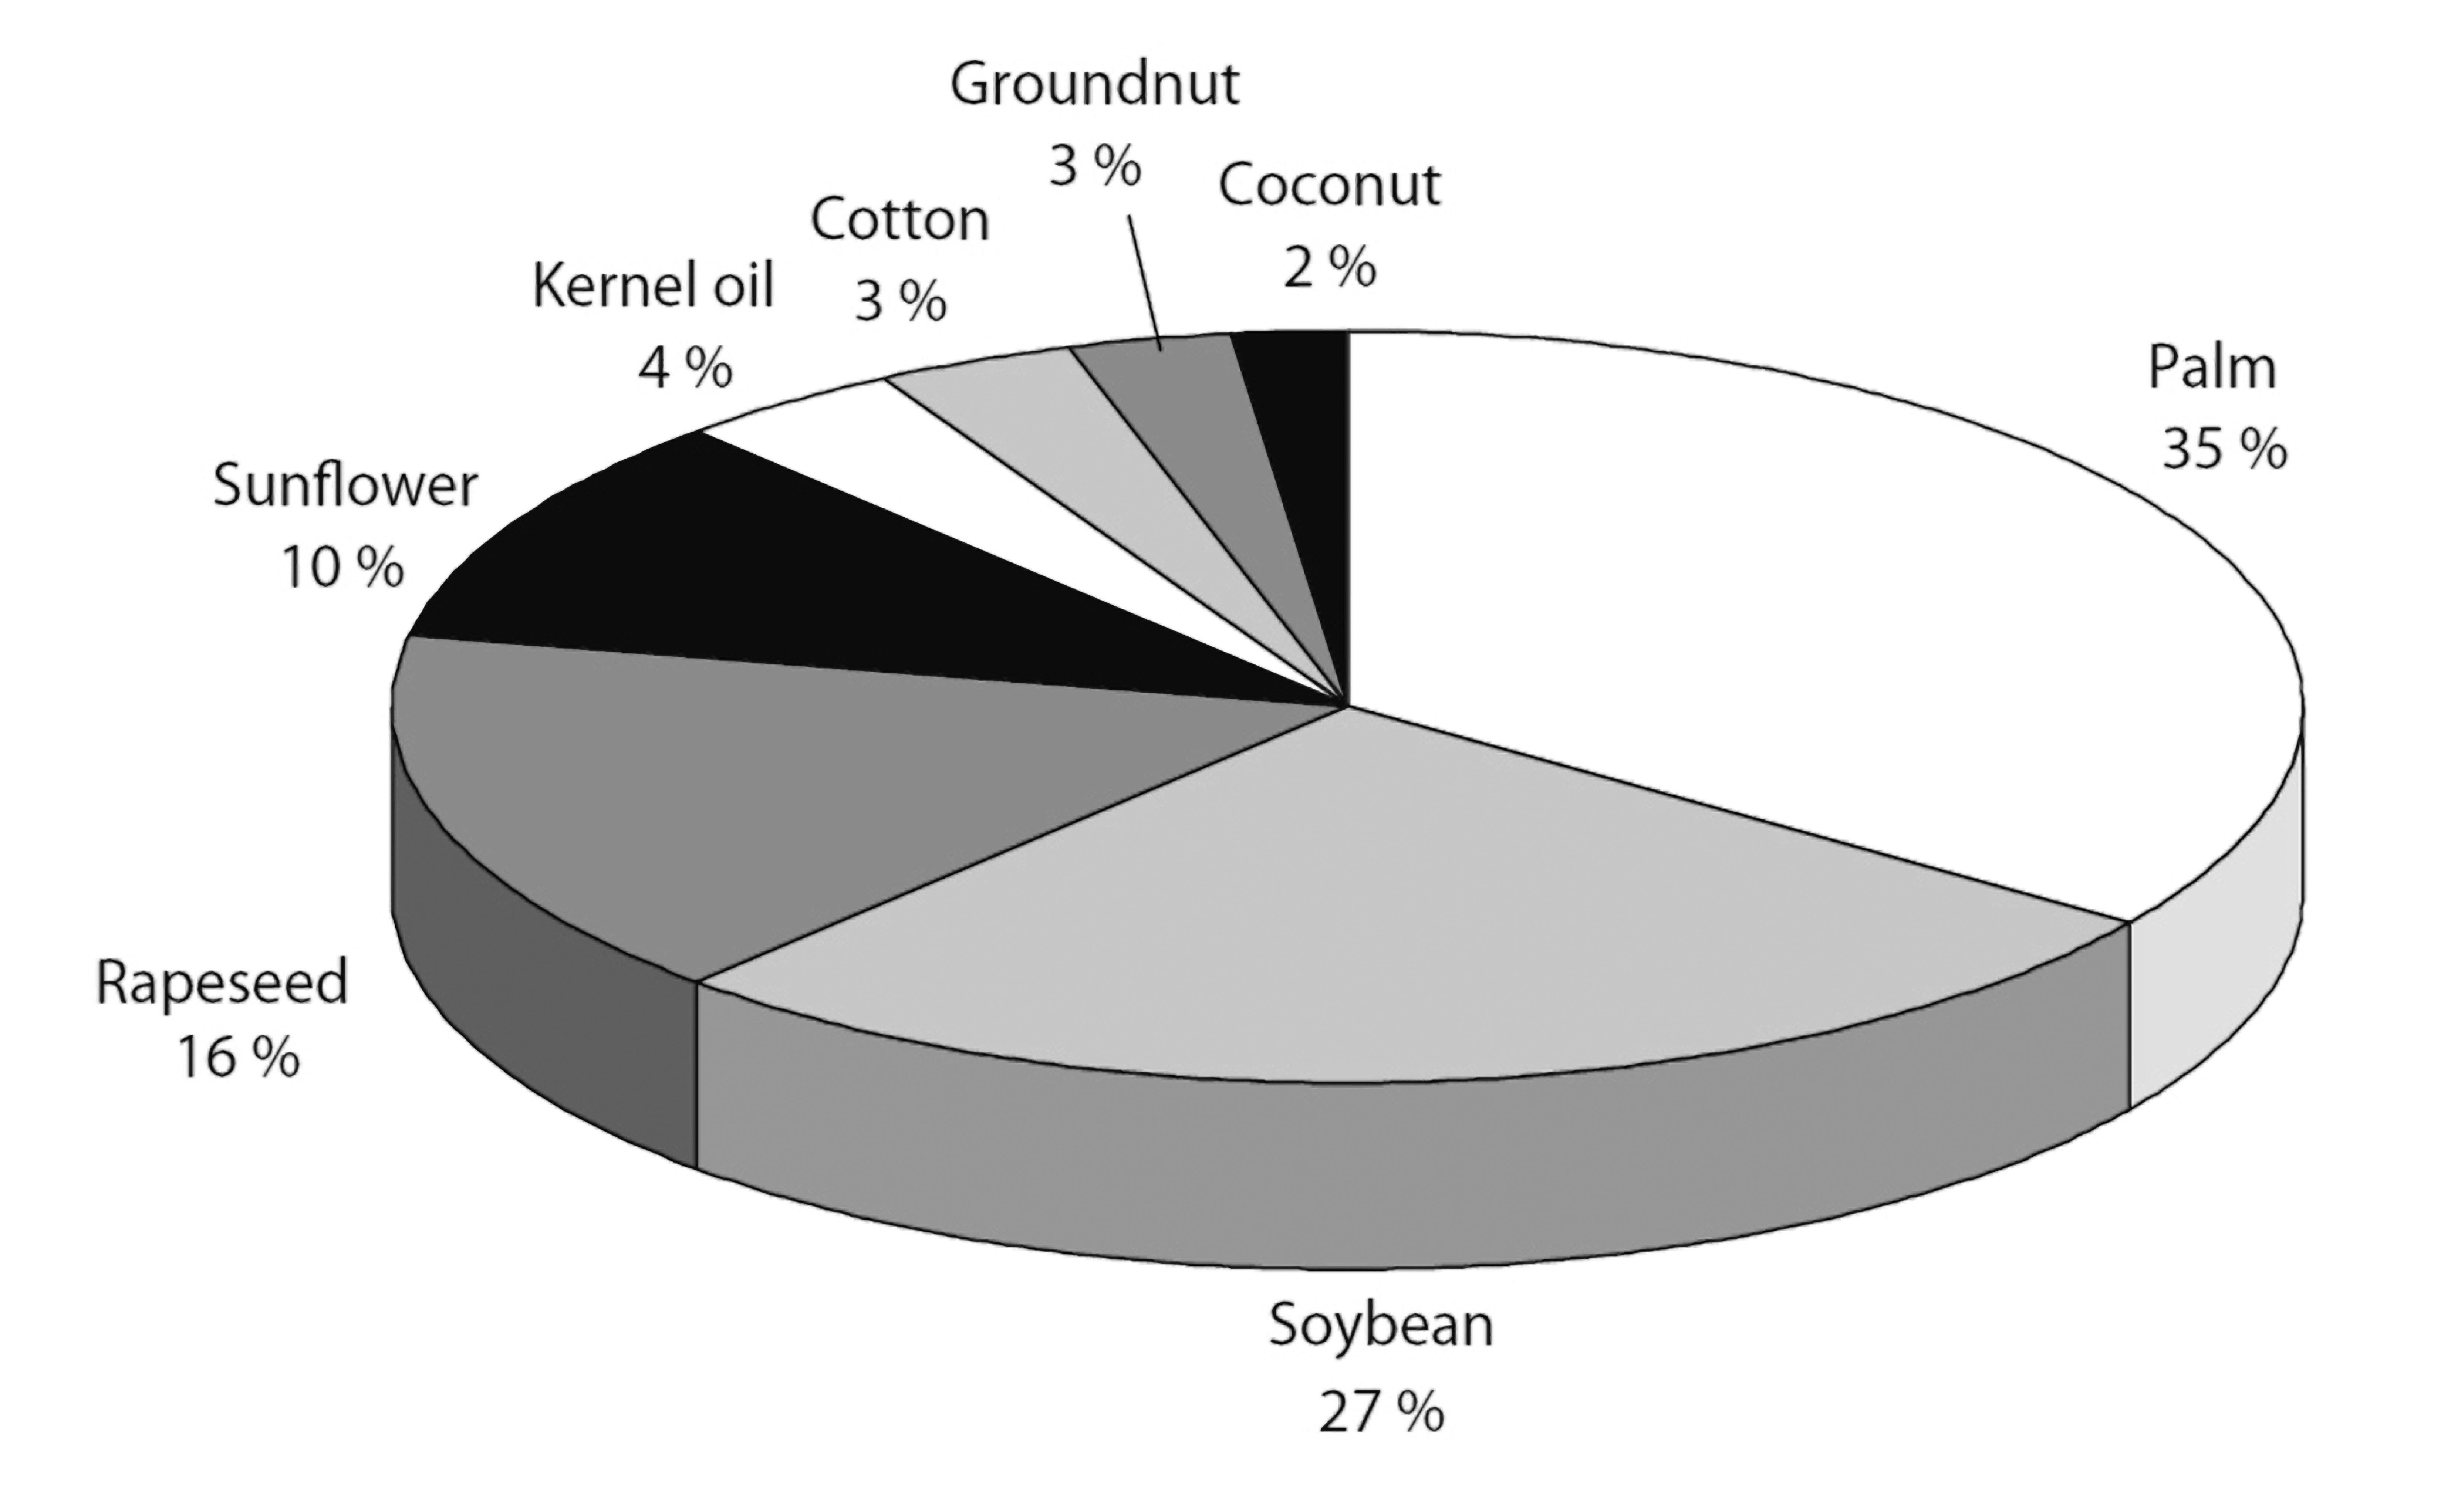 Share of palm oil in the global market (statistics from 2013).